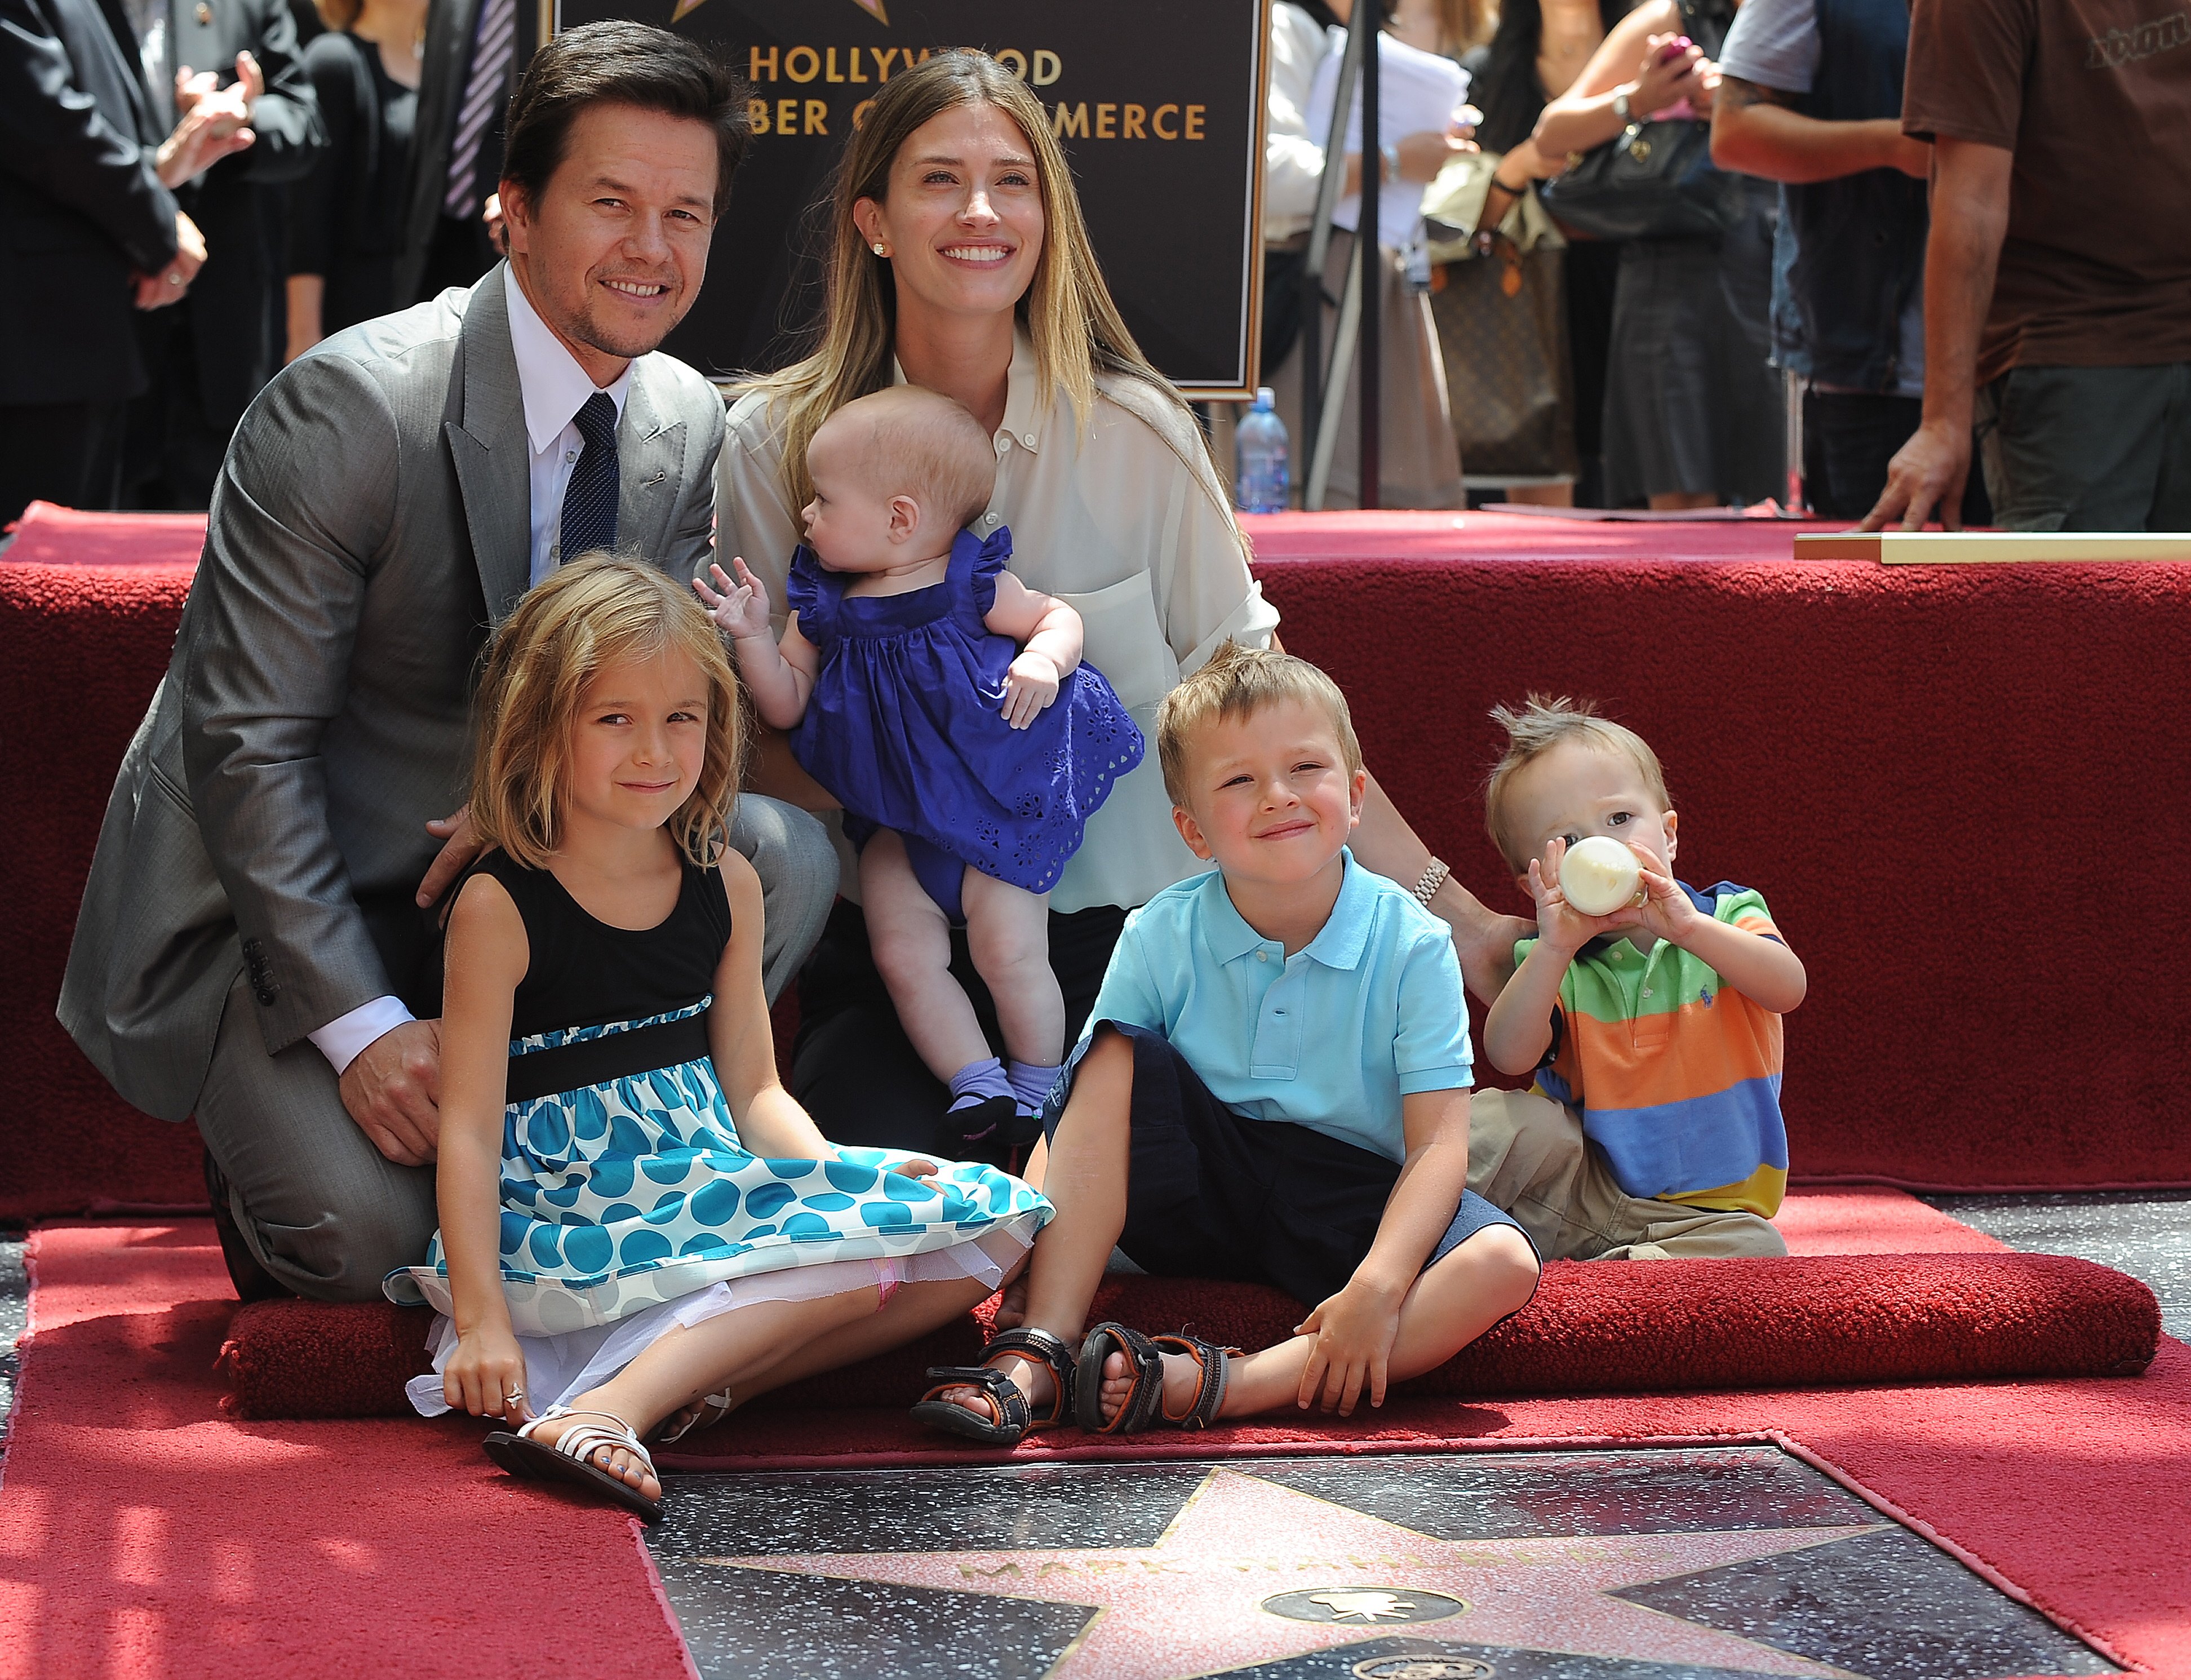 Mark Wahlberg, Rhea Durham, and their children Ella, Grace, Michael, and Brendan as the actor is honored with a star on the Hollywood Walk on July 29, 2010 | Source: Getty Images